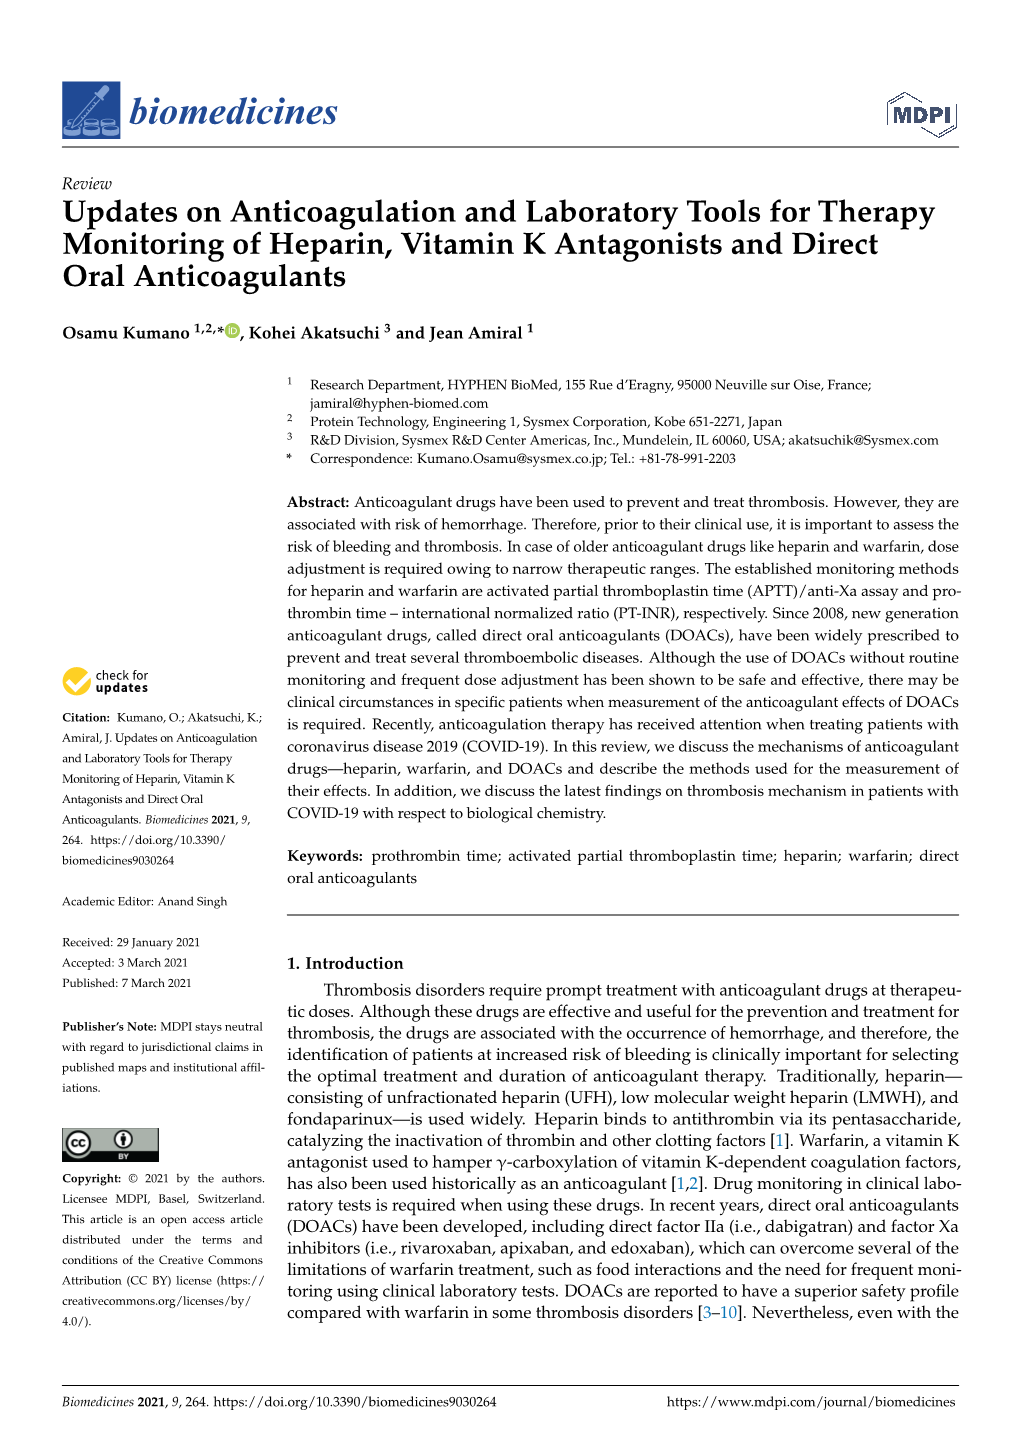 Updates on Anticoagulation and Laboratory Tools for Therapy Monitoring of Heparin, Vitamin K Antagonists and Direct Oral Anticoagulants